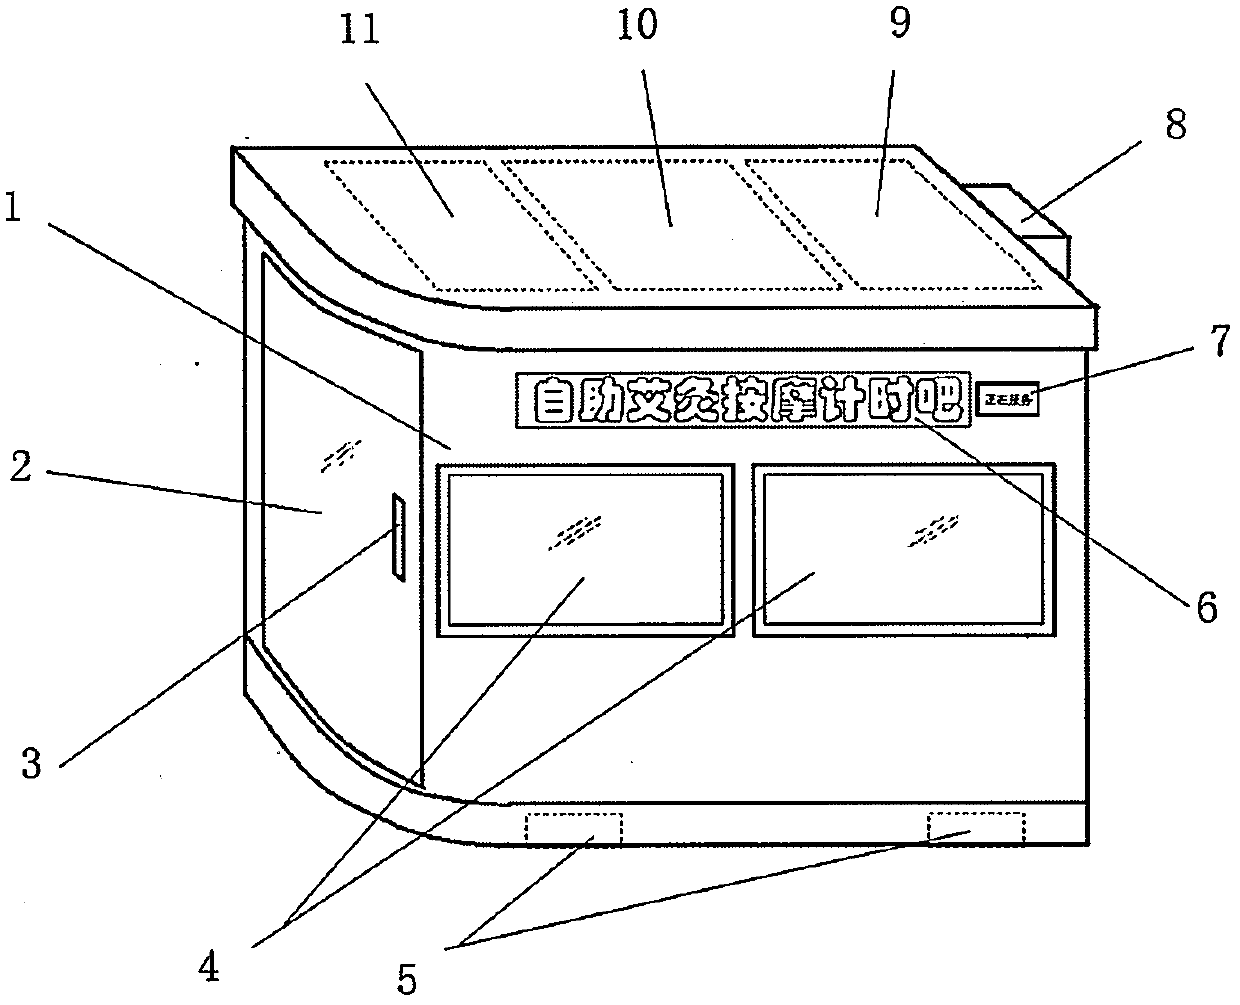 Self-service moxa-moxibustion and massage timing health care kiosk and operation pattern thereof